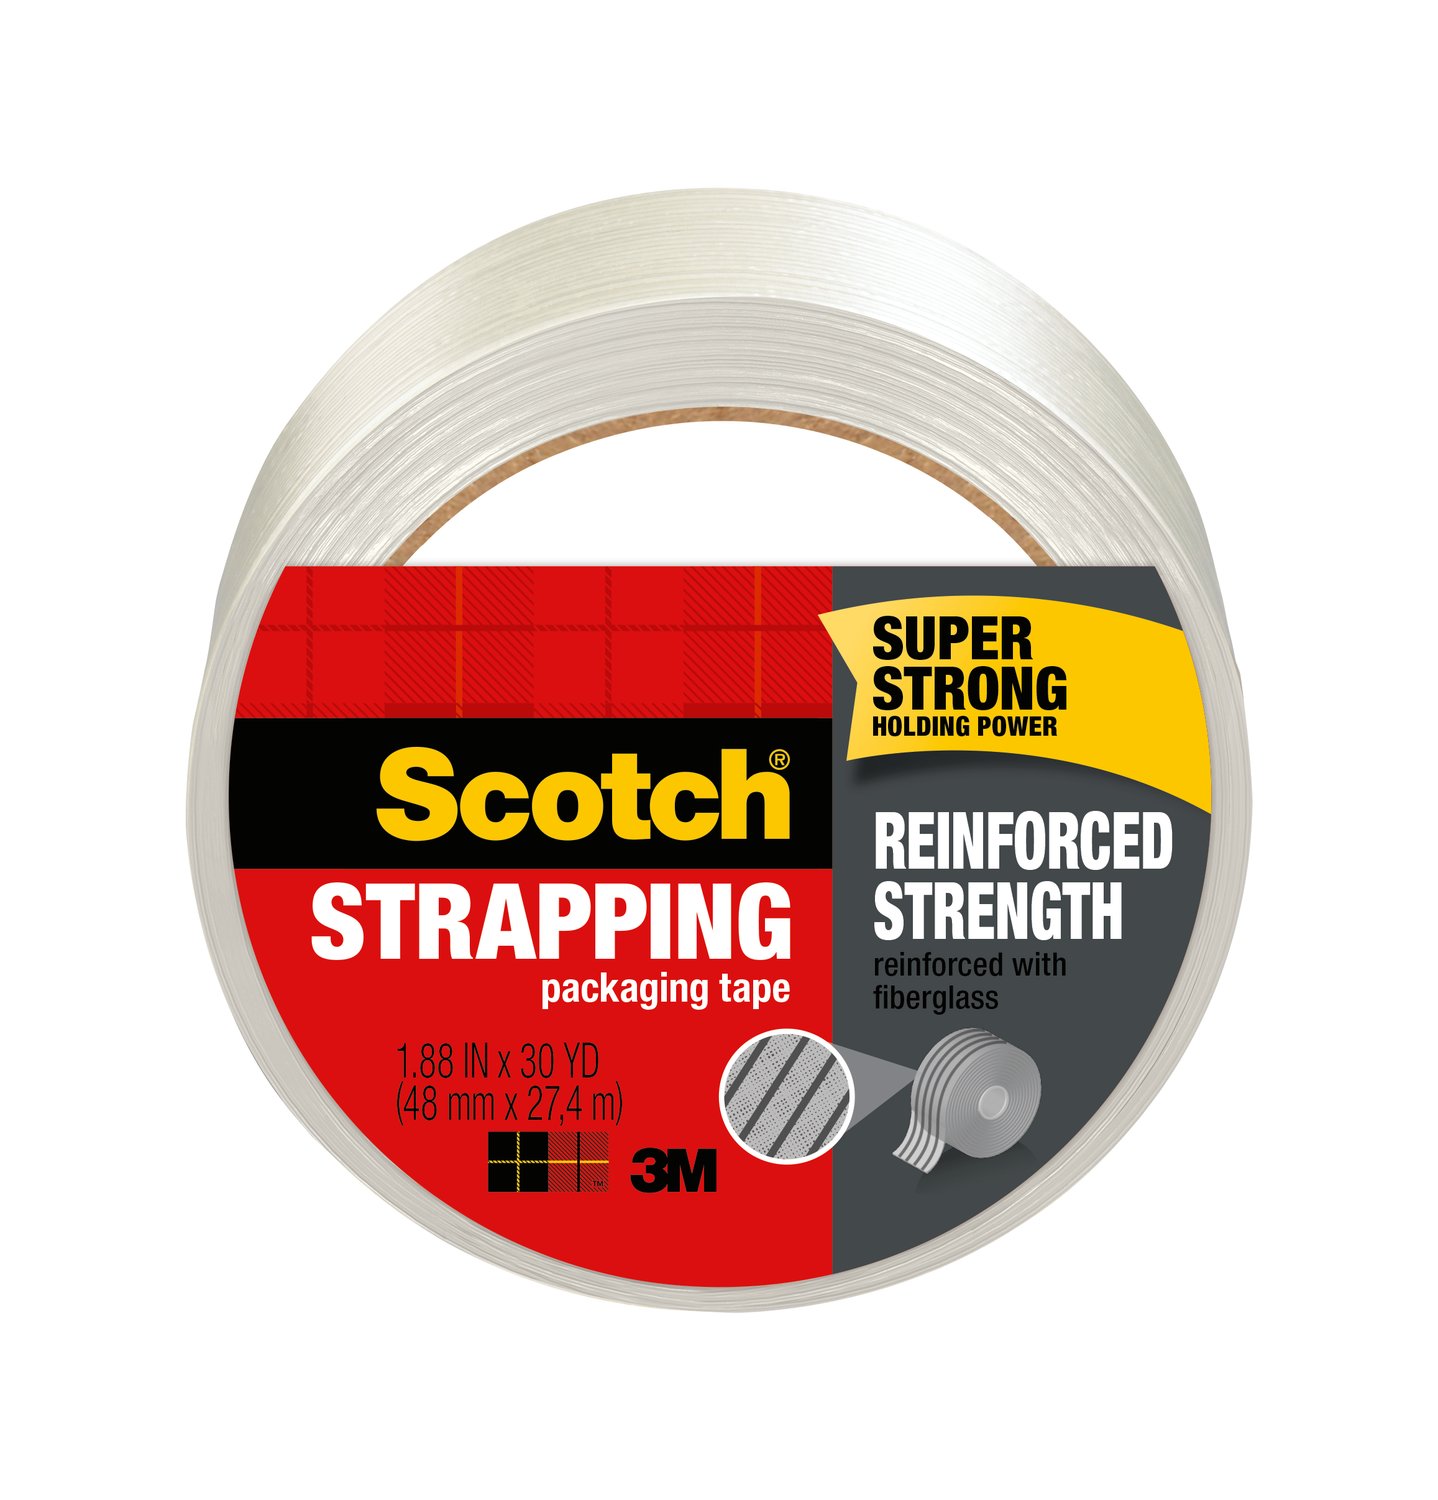 7010332969 - Scotch Reinforced Strength Shipping Strapping Tape 8950-30, 1.88 in x
30 yd (48 mm x 27,4 m)